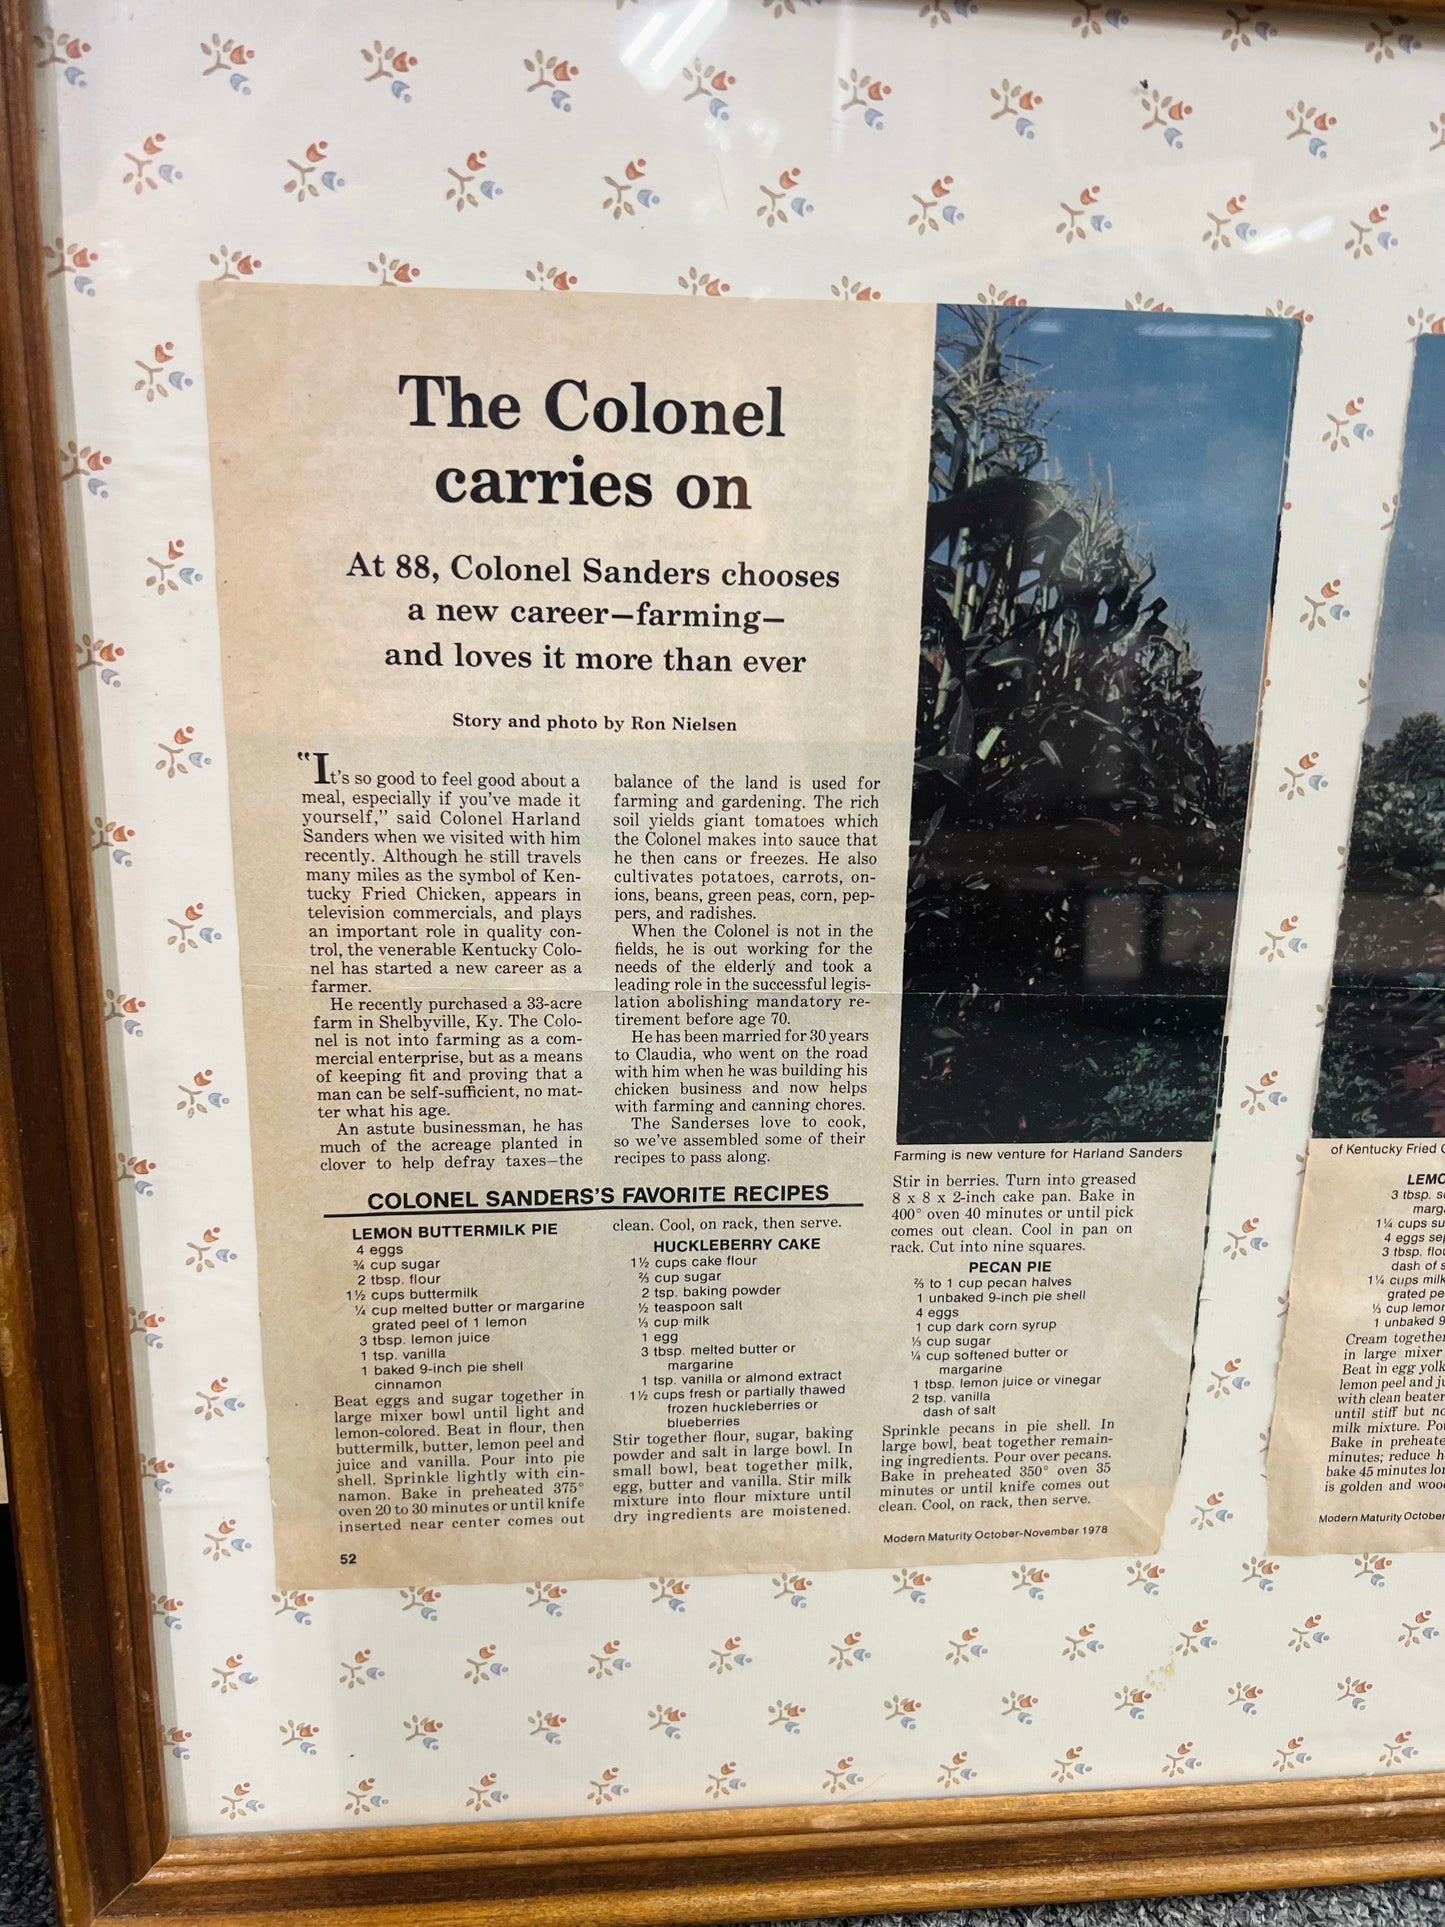 Colonel Sanders Carries On Newspaper Article with His Favorite Recipes